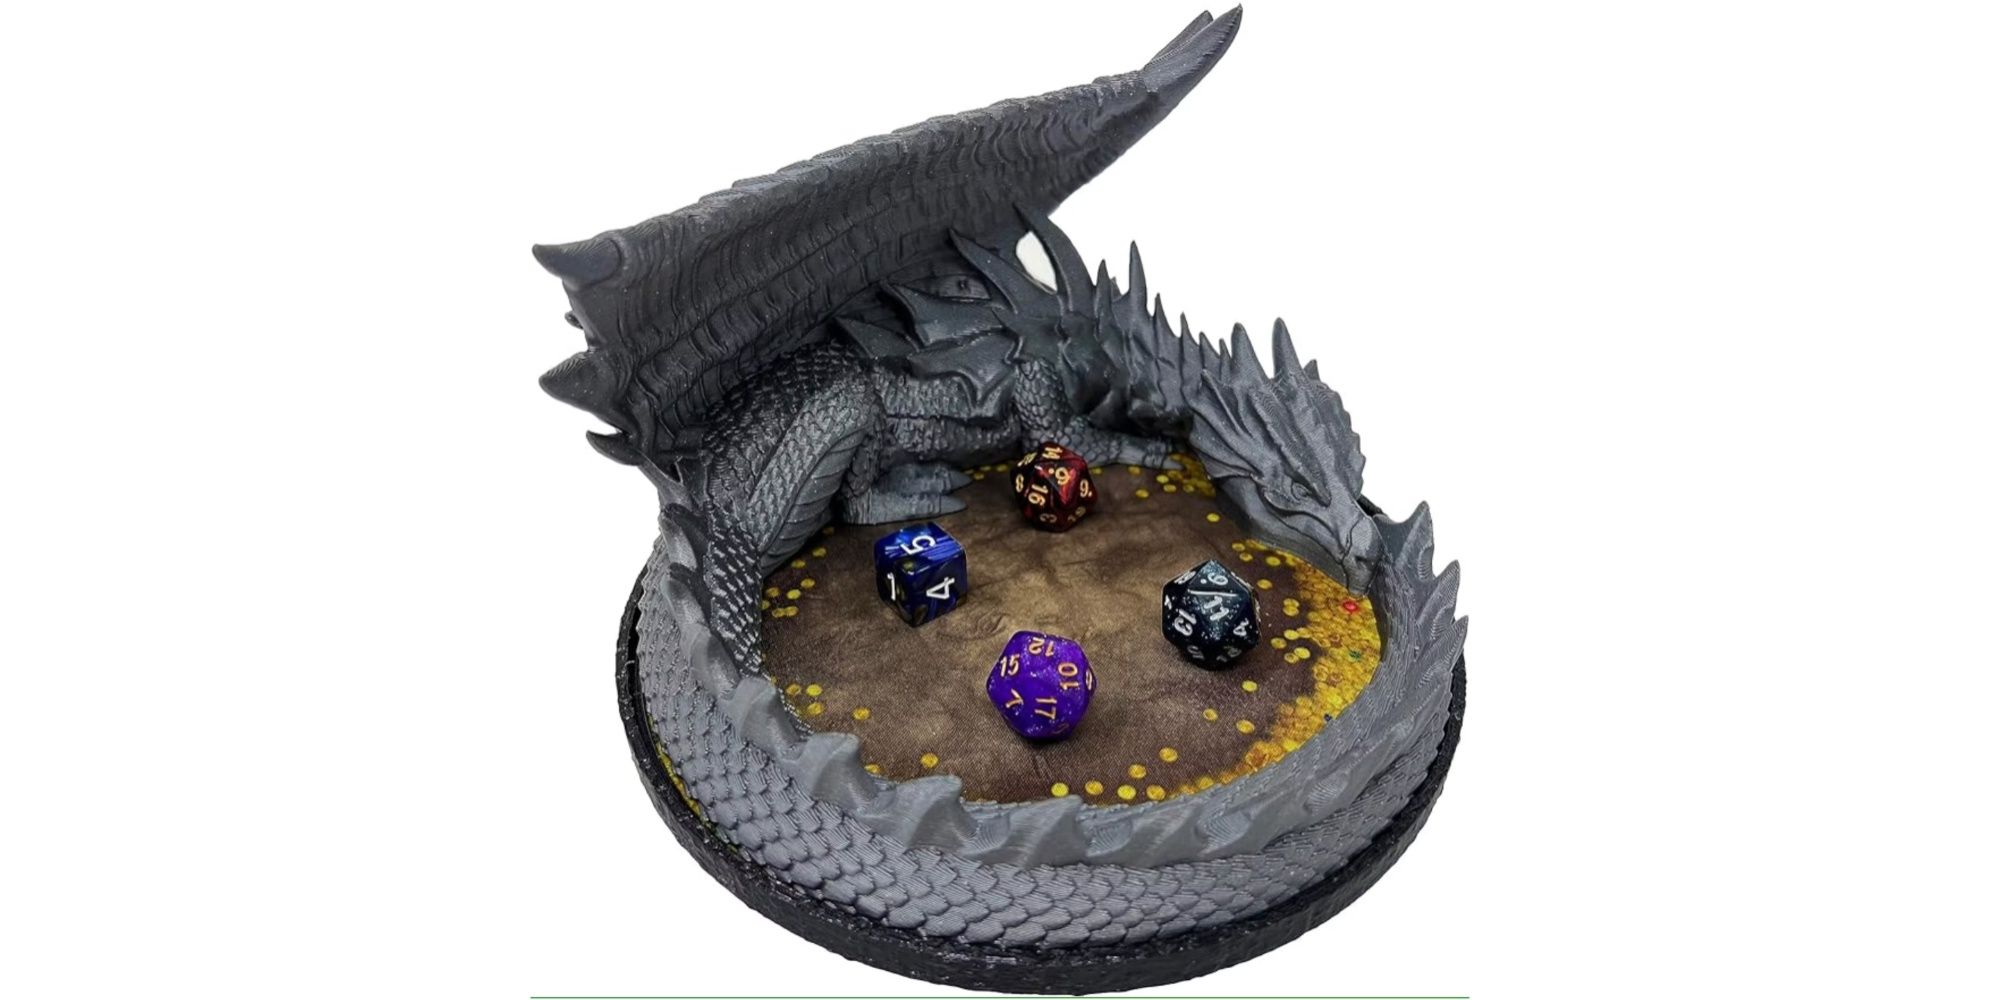 DND Dice tray in the shape of a dragon with dice being rolled inside